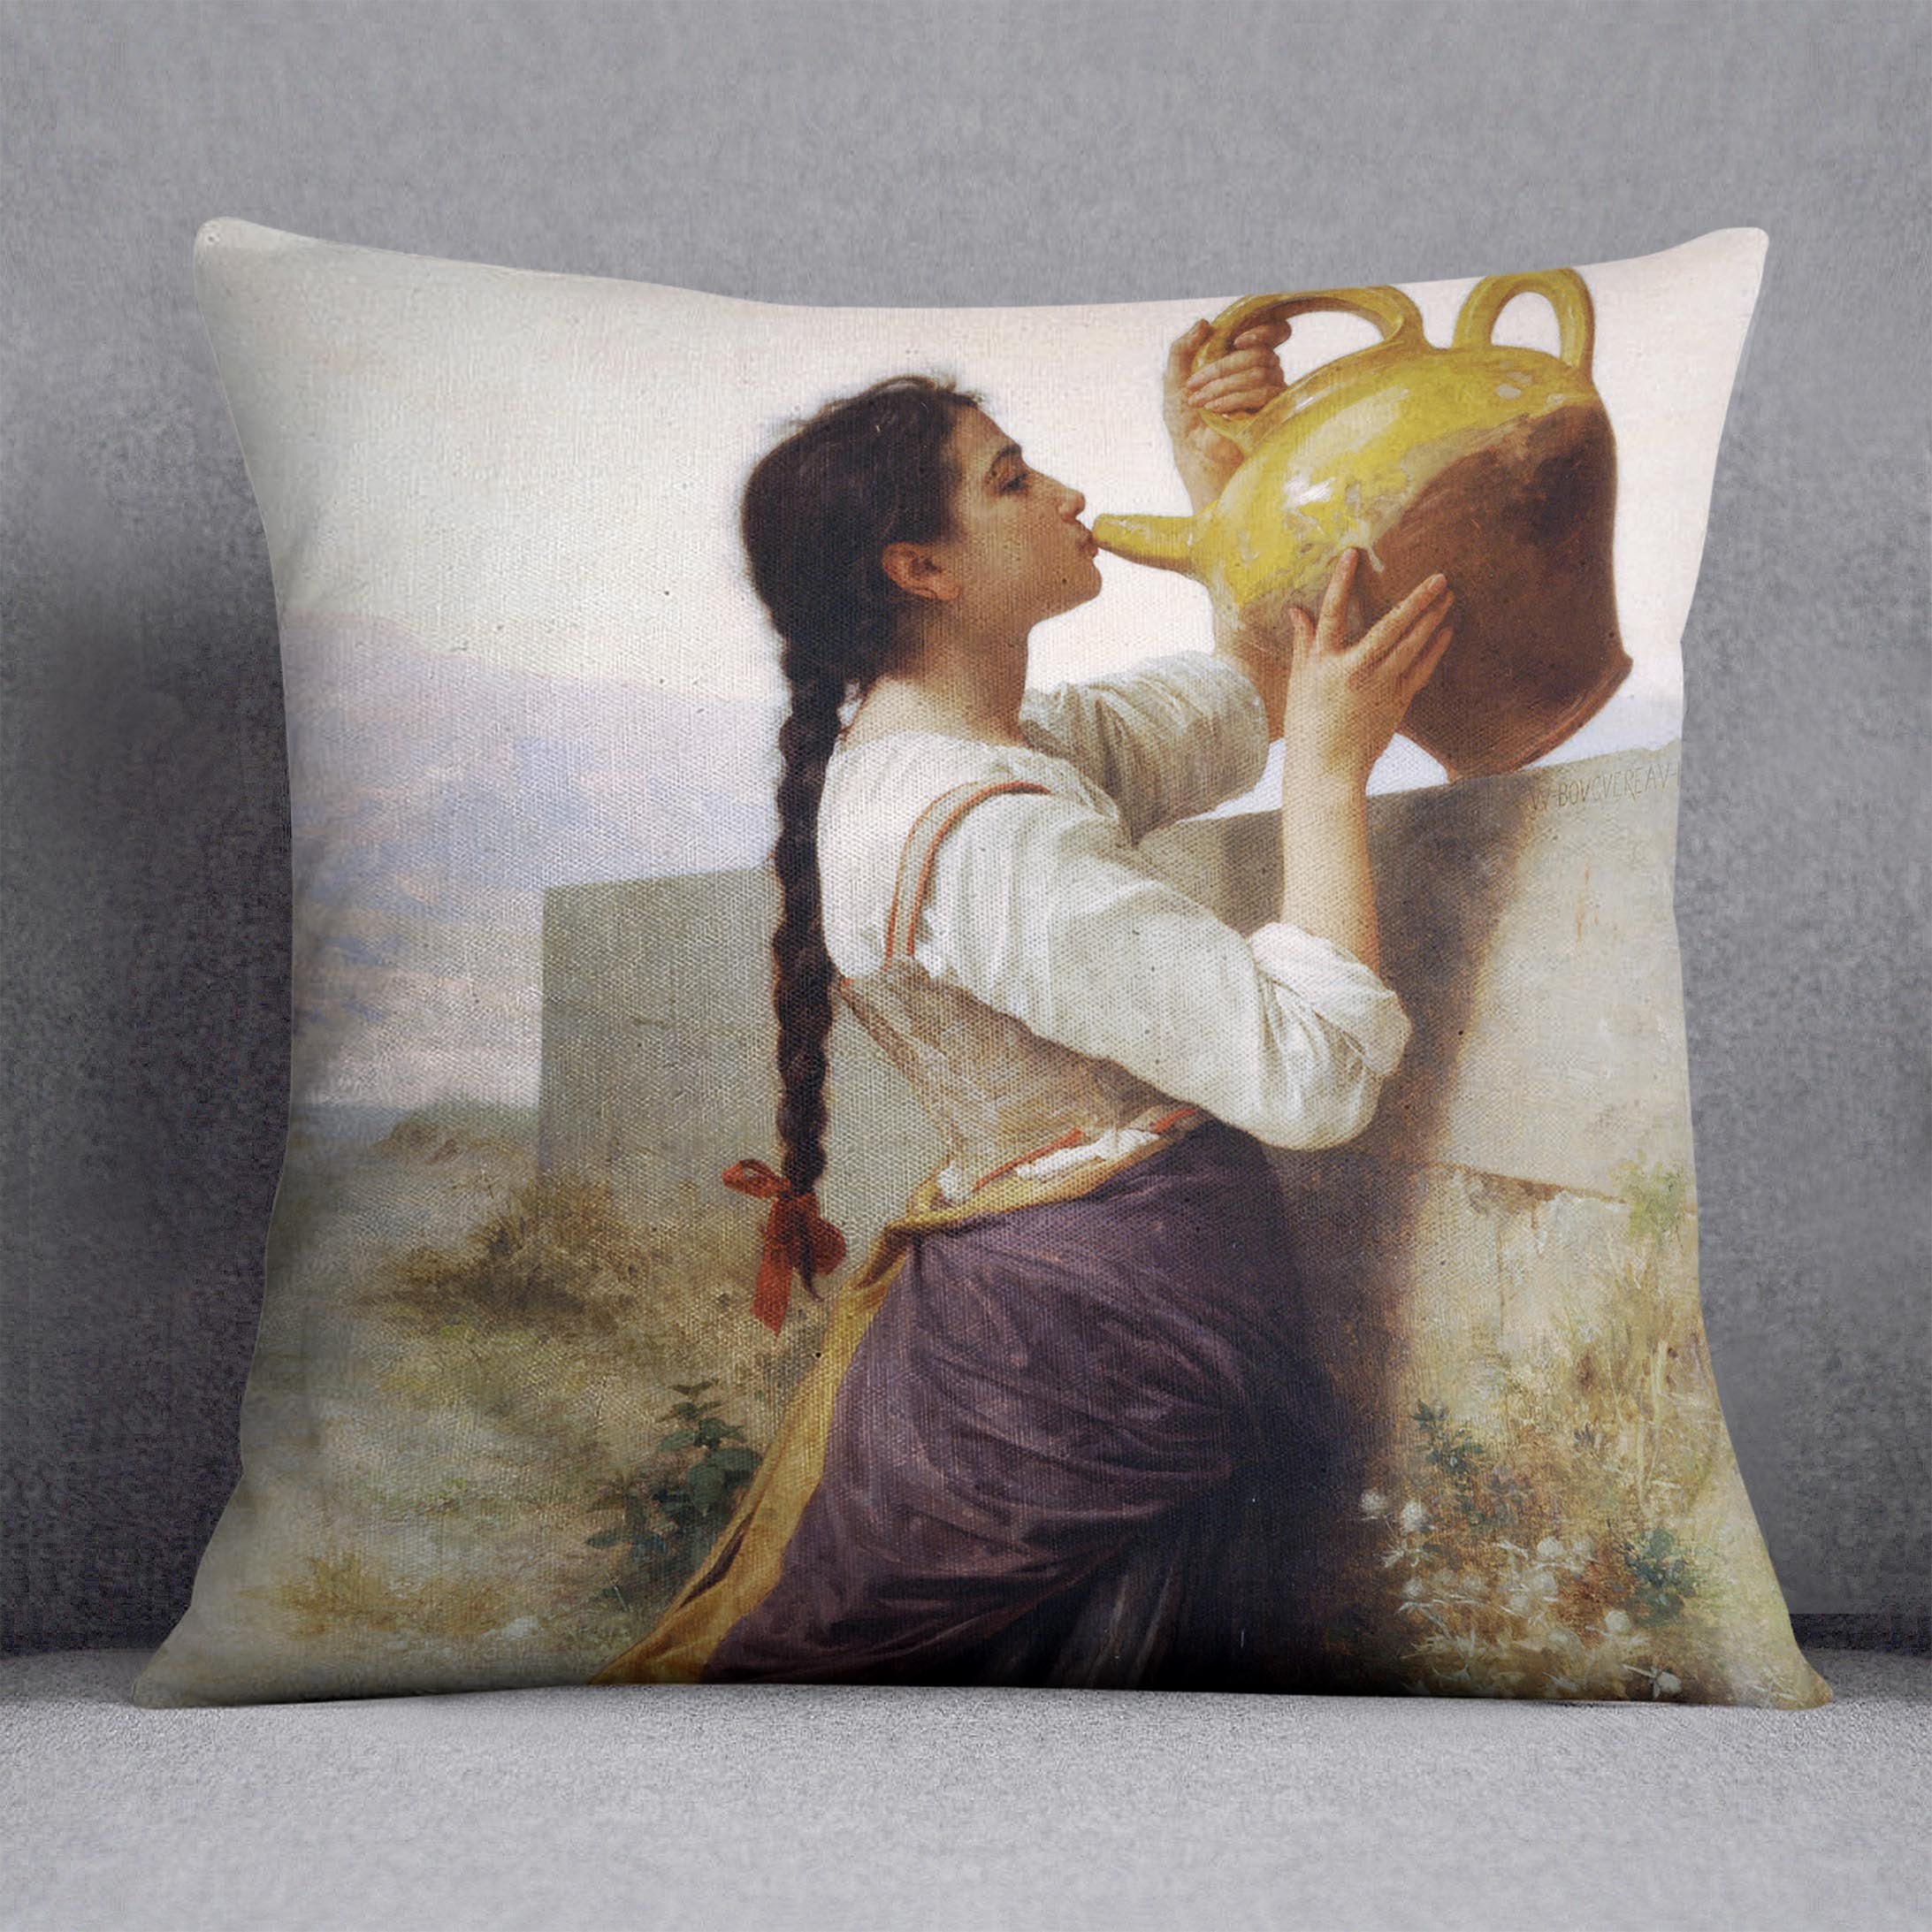 Thirst By Bouguereau Throw Pillow